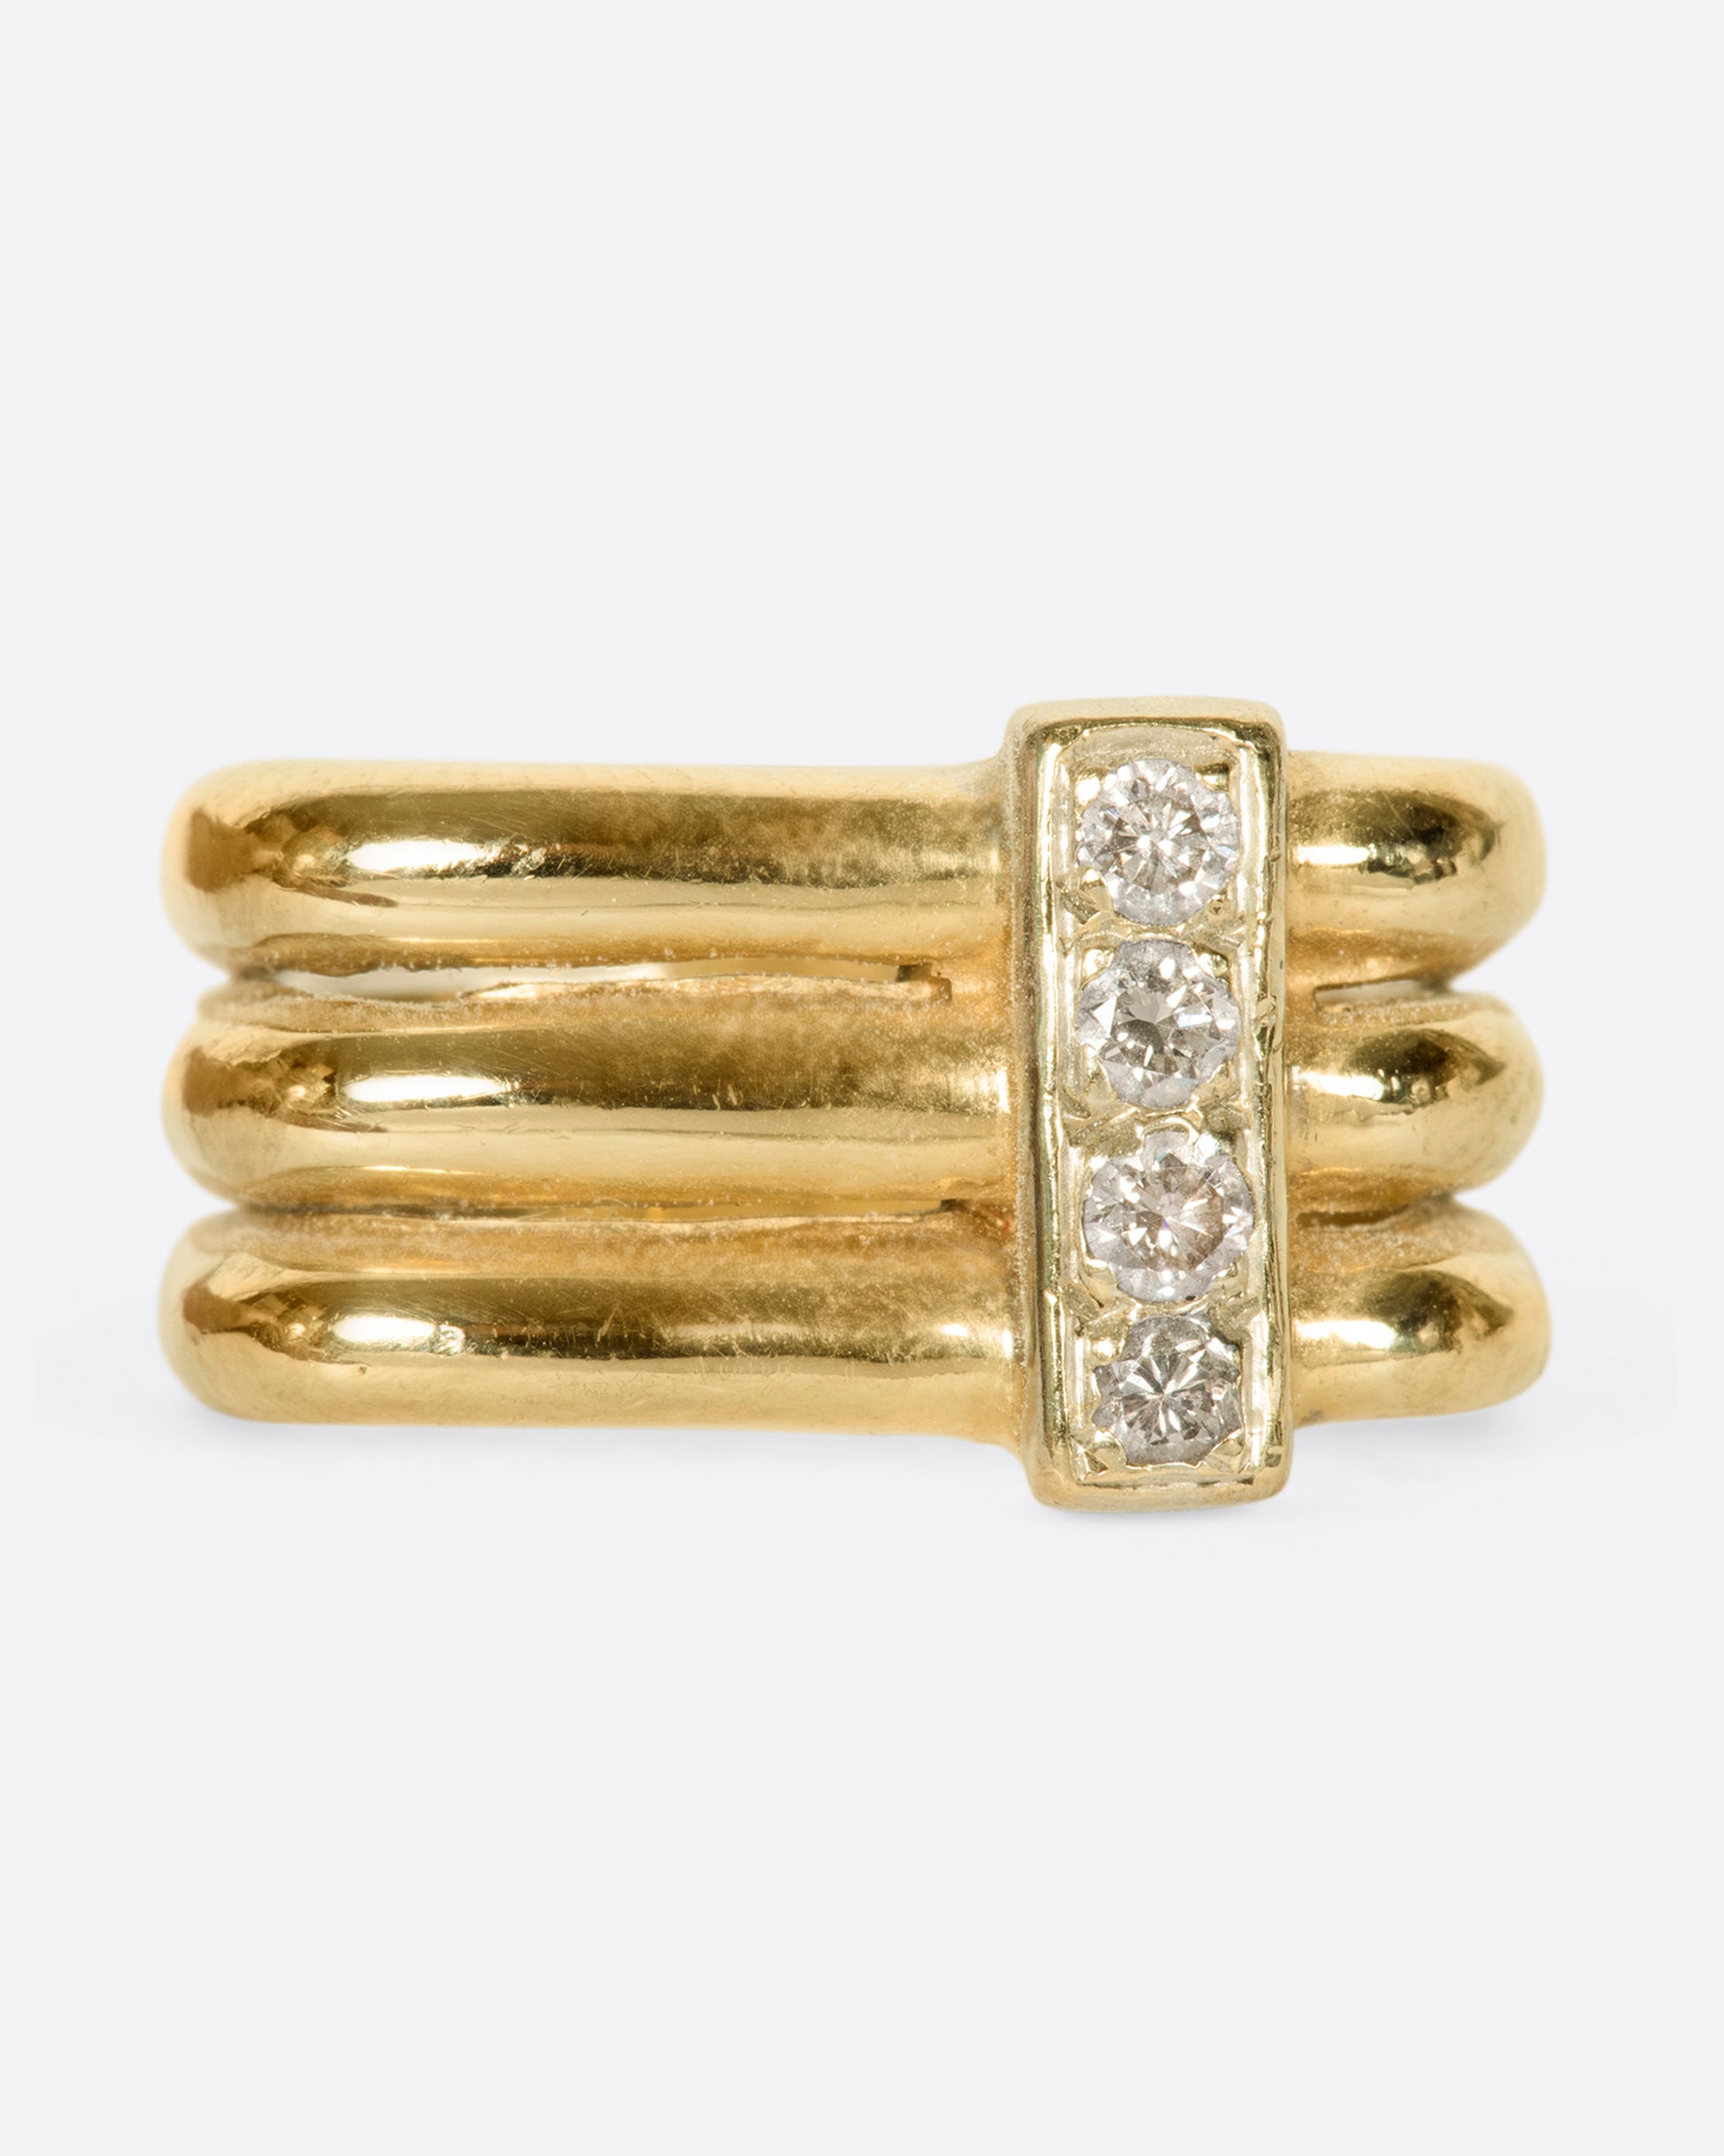 A single band that gives the illusion of a stack, connected with diamonds, shown from the front.